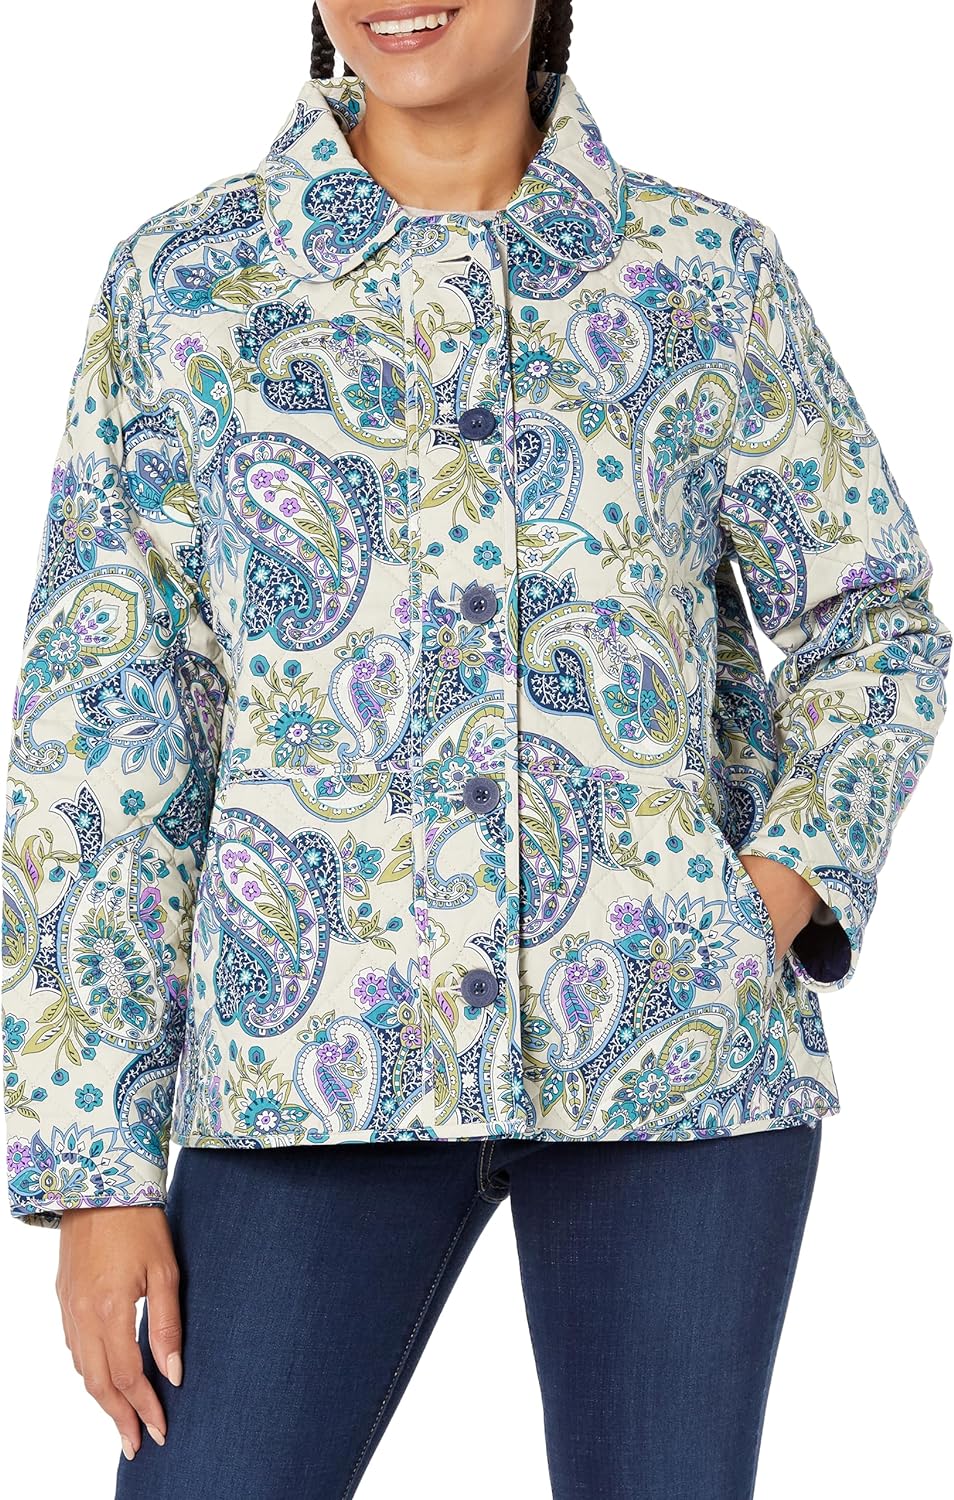 The paisley design is so pretty and the jacket is warm, the material soft and very high quality. I love the whimsical patterns and the signature quilting. It' lovely!